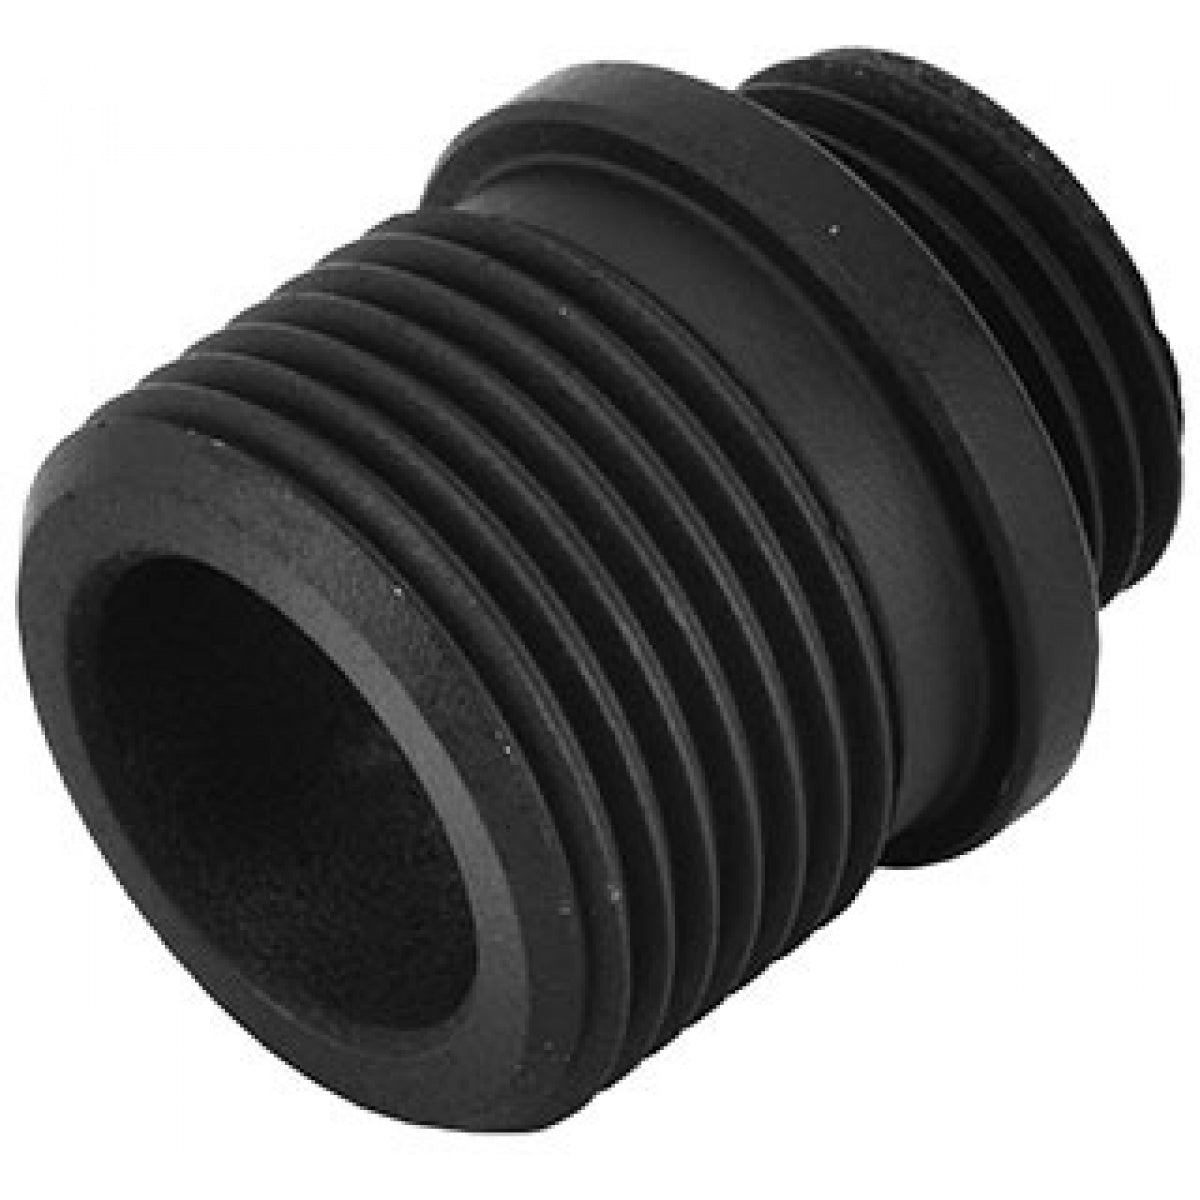 WE Tech 14mm CCW Counter-Clockwise Airsoft Mock Suppressor Adapter - ssairsoft